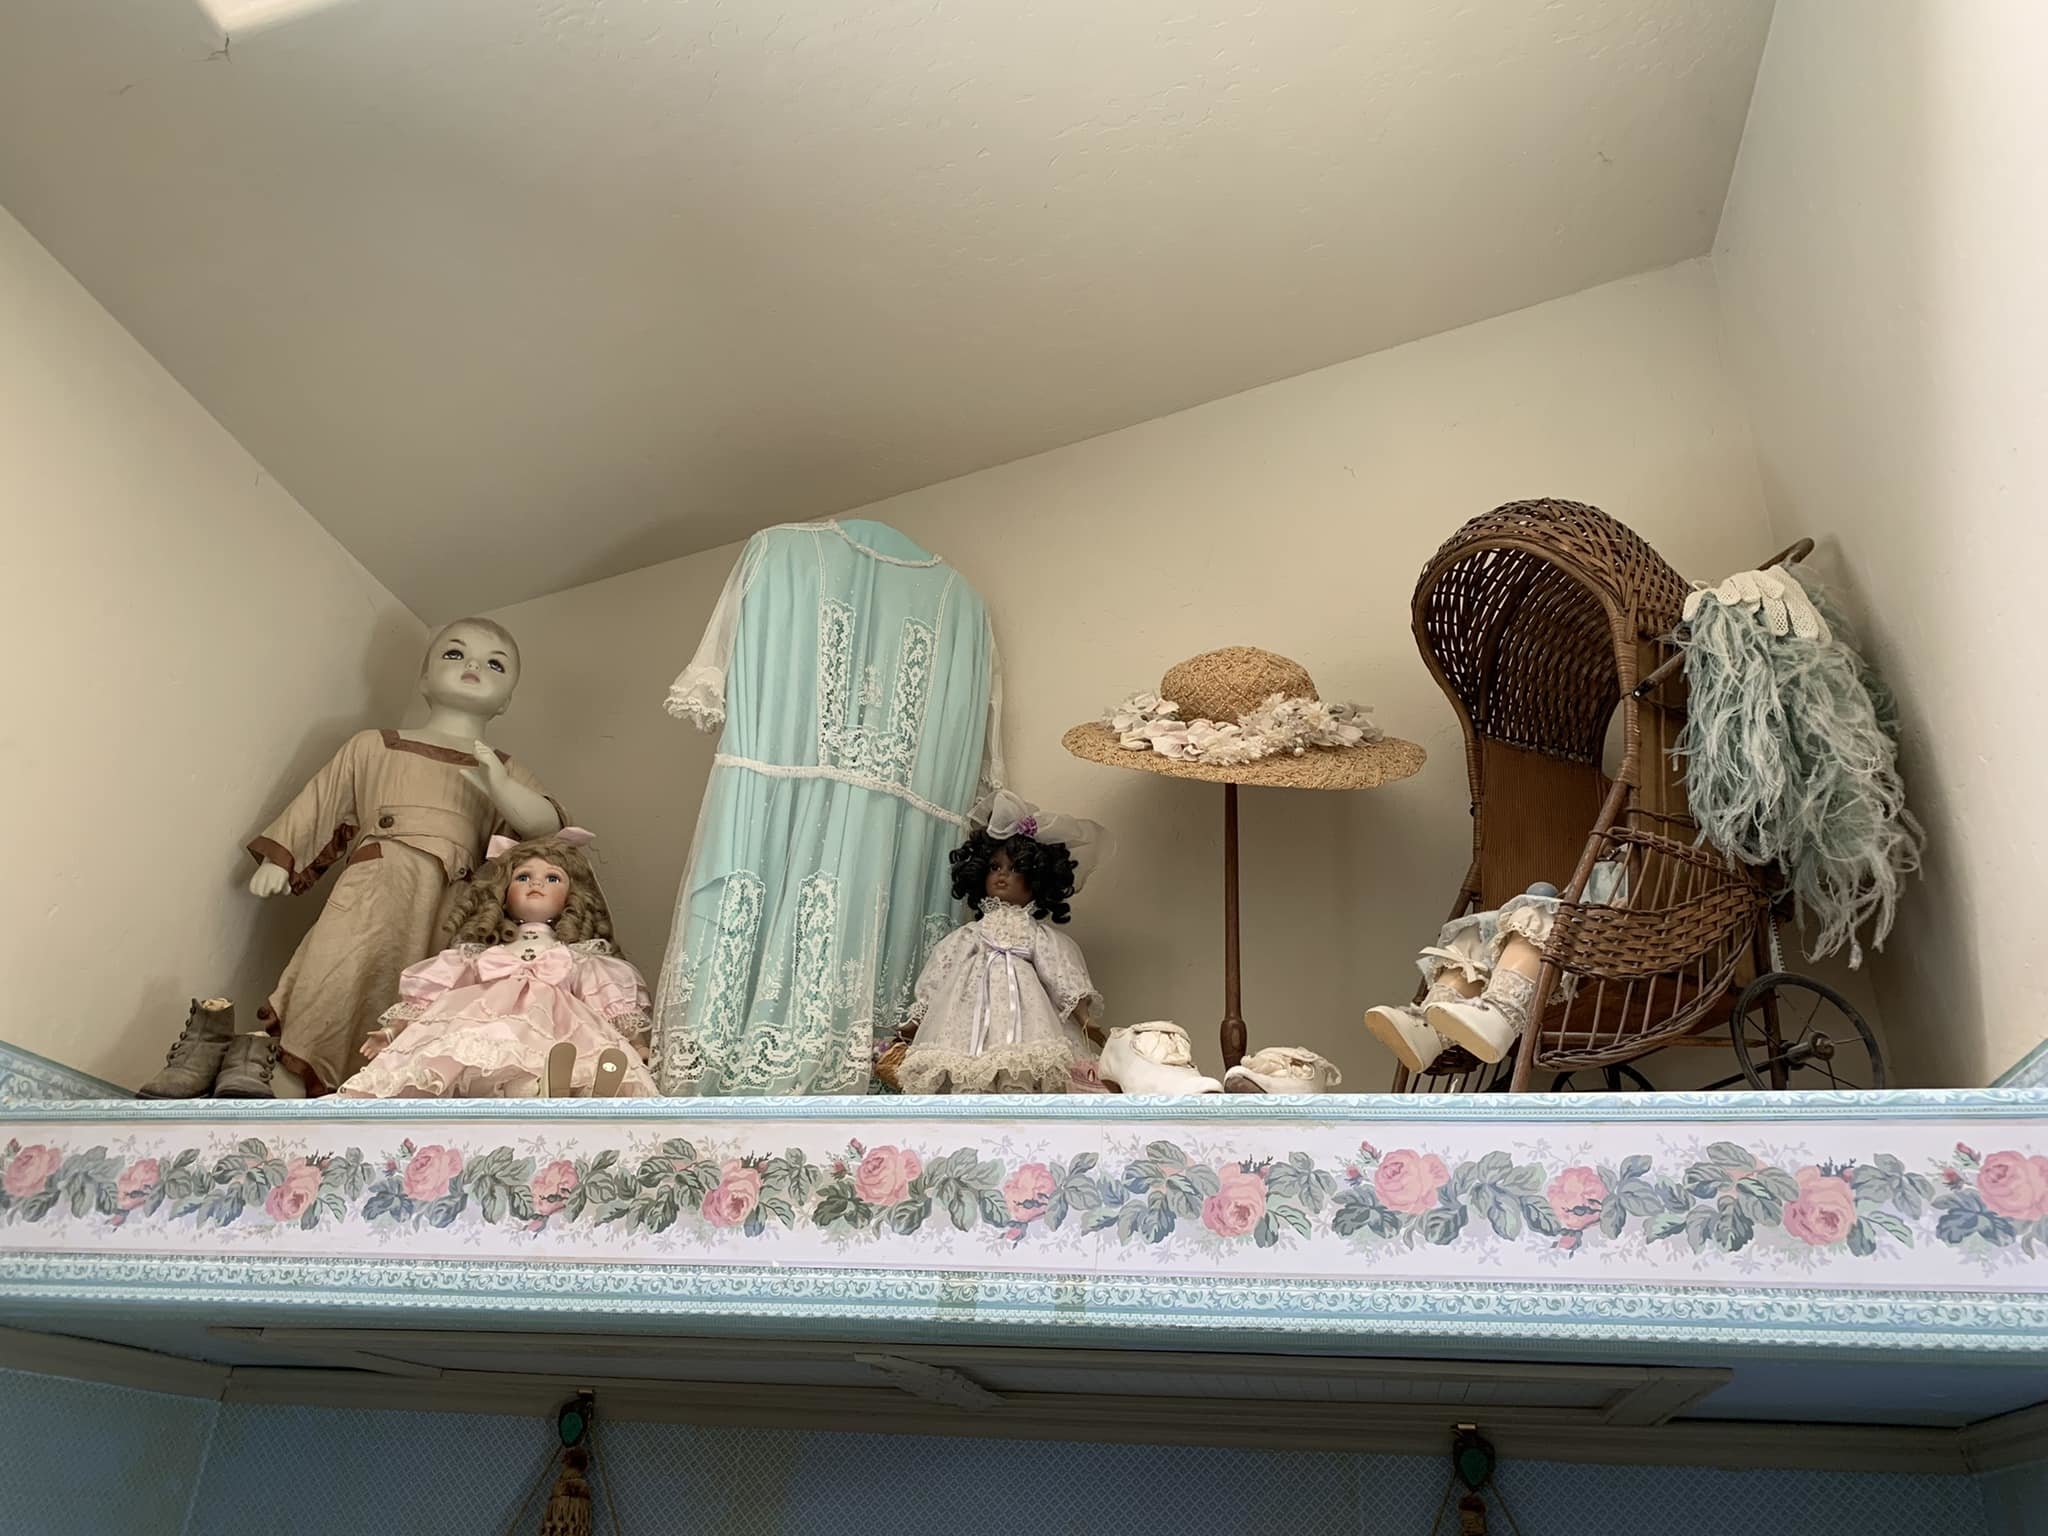 Antique dolls and furntiure kept on a shelf in a bathroom